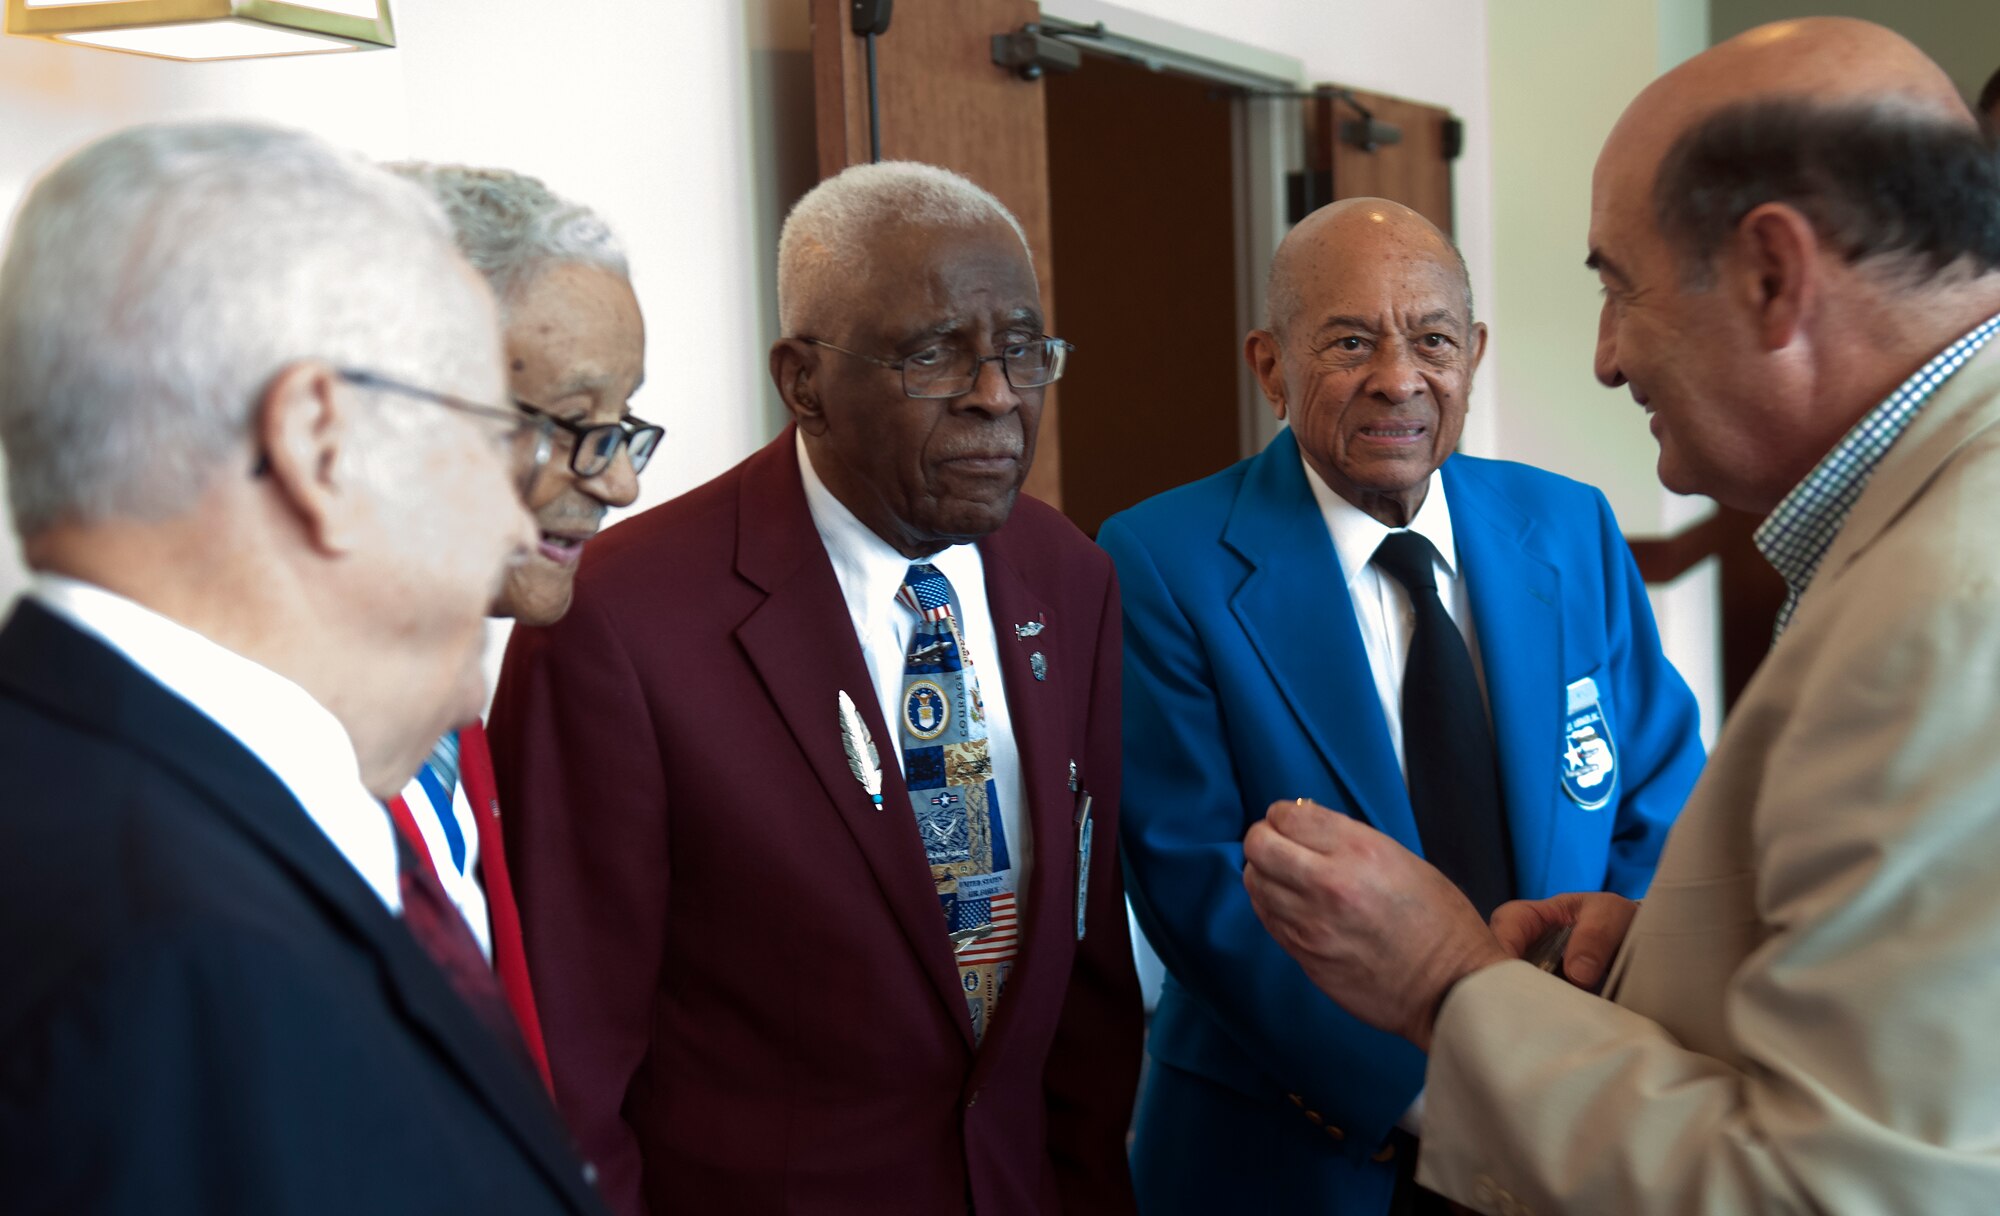 From left to right, retired Lt. Col. George Hardy, Col. Charles McGee, and Lt. Cols. James Harvey and Harry Stewart, four of the original Tuskegee pilots, speak with Wyoming State Senator Stephan Pappas during a reception at the Historic Plains Hotel, Cheyenne, Wyo., August 14, 2015. As a retired brigadier general, Pappas was able to speak about many changes he saw in the Air Force that came about from the achievements of the Tuskegee Airmen. (U.S. Air Force photo by Airman 1st Class Brandon Valle)